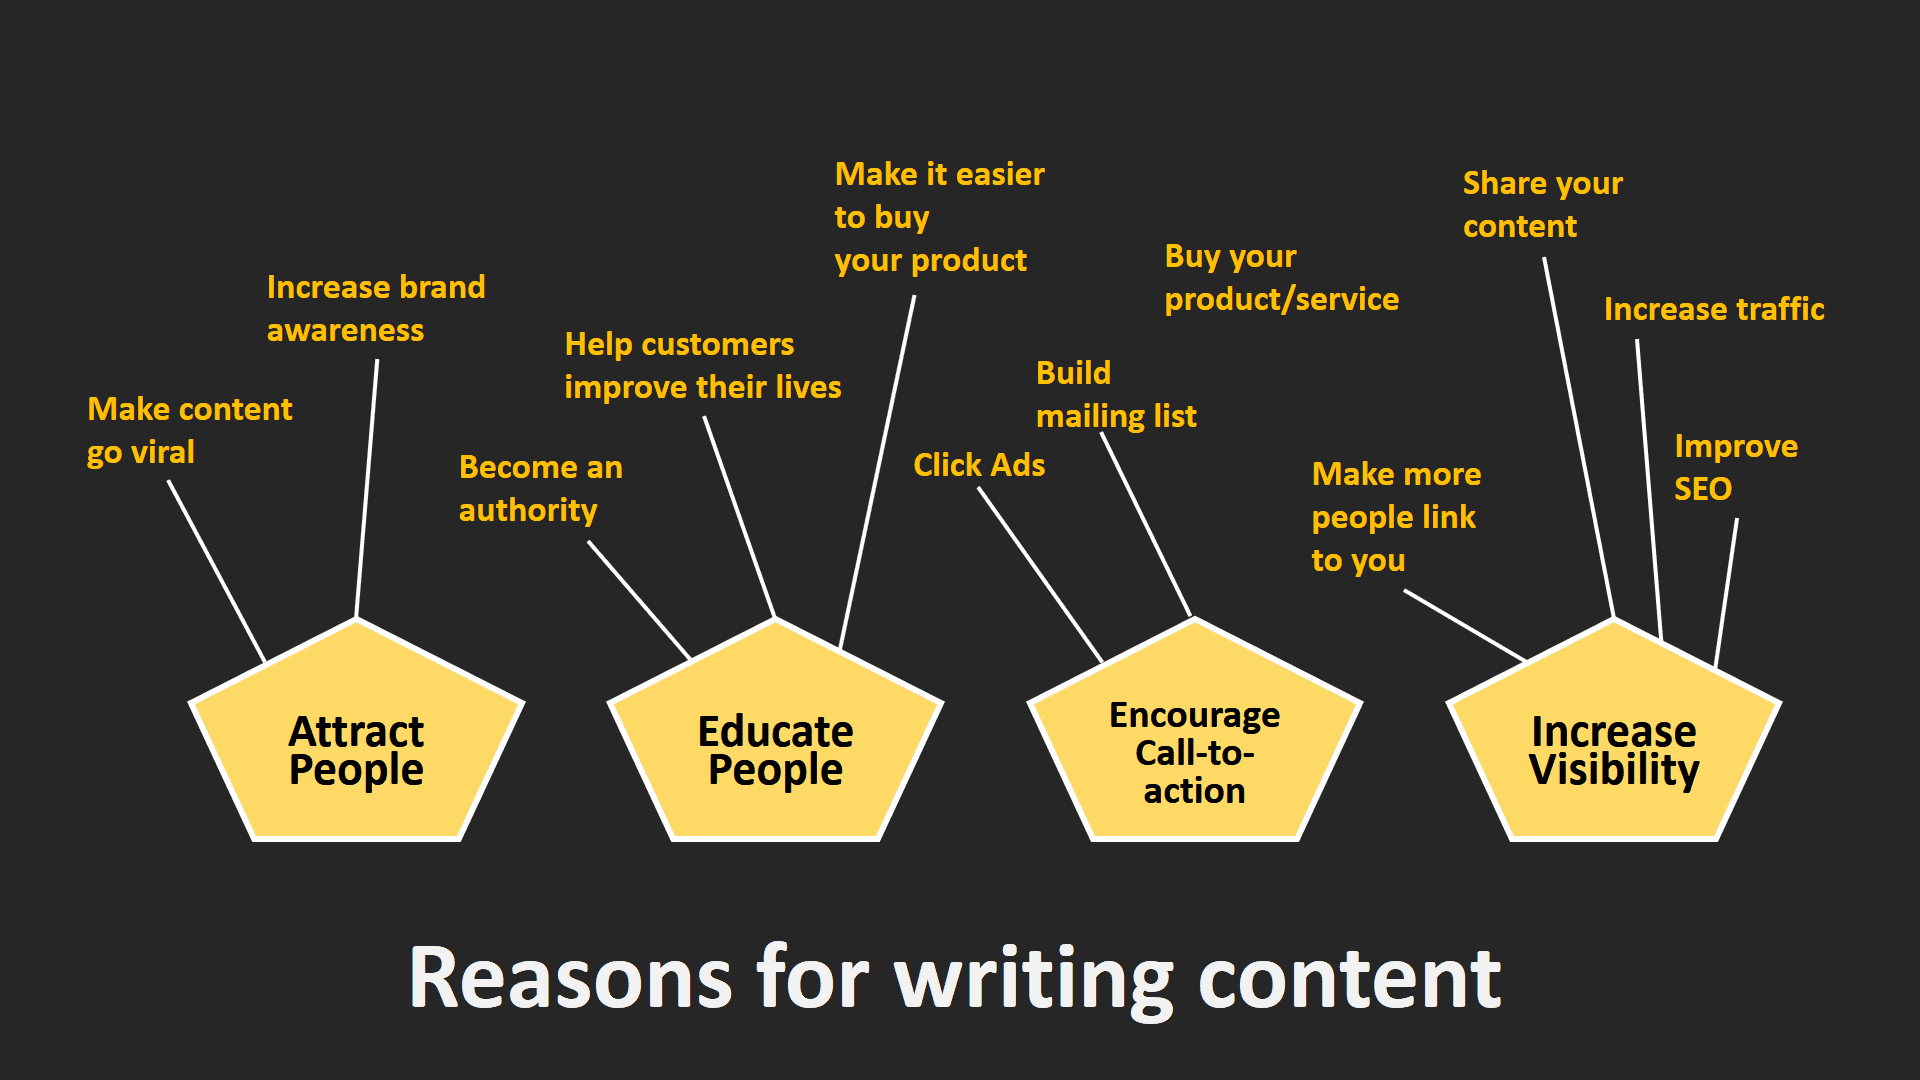 Different reasons for writing content